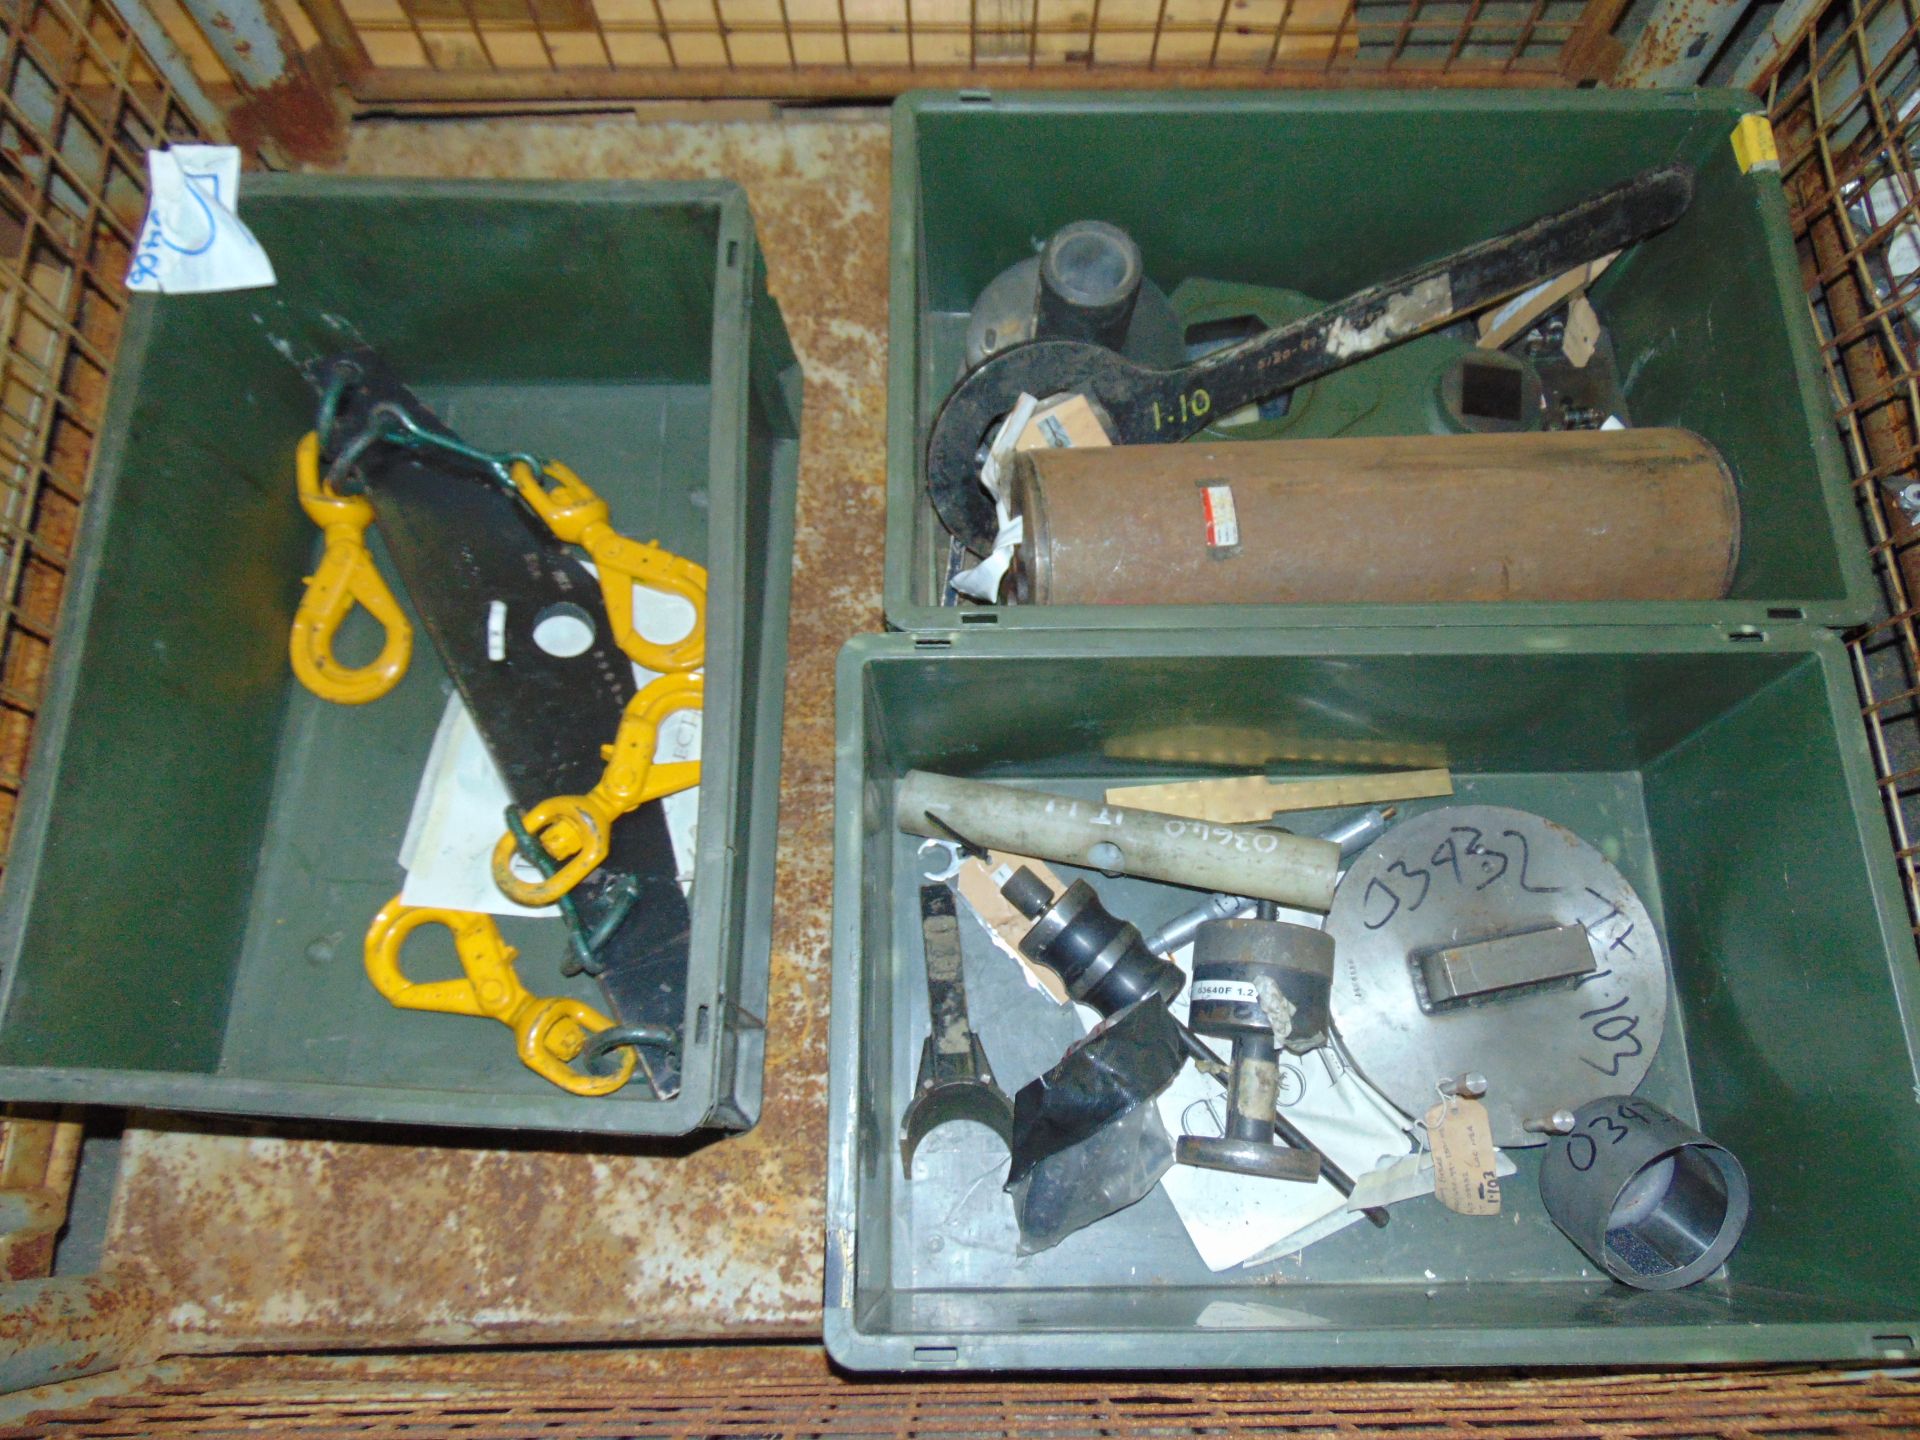 Mixed Stillage of Tools and Equipment